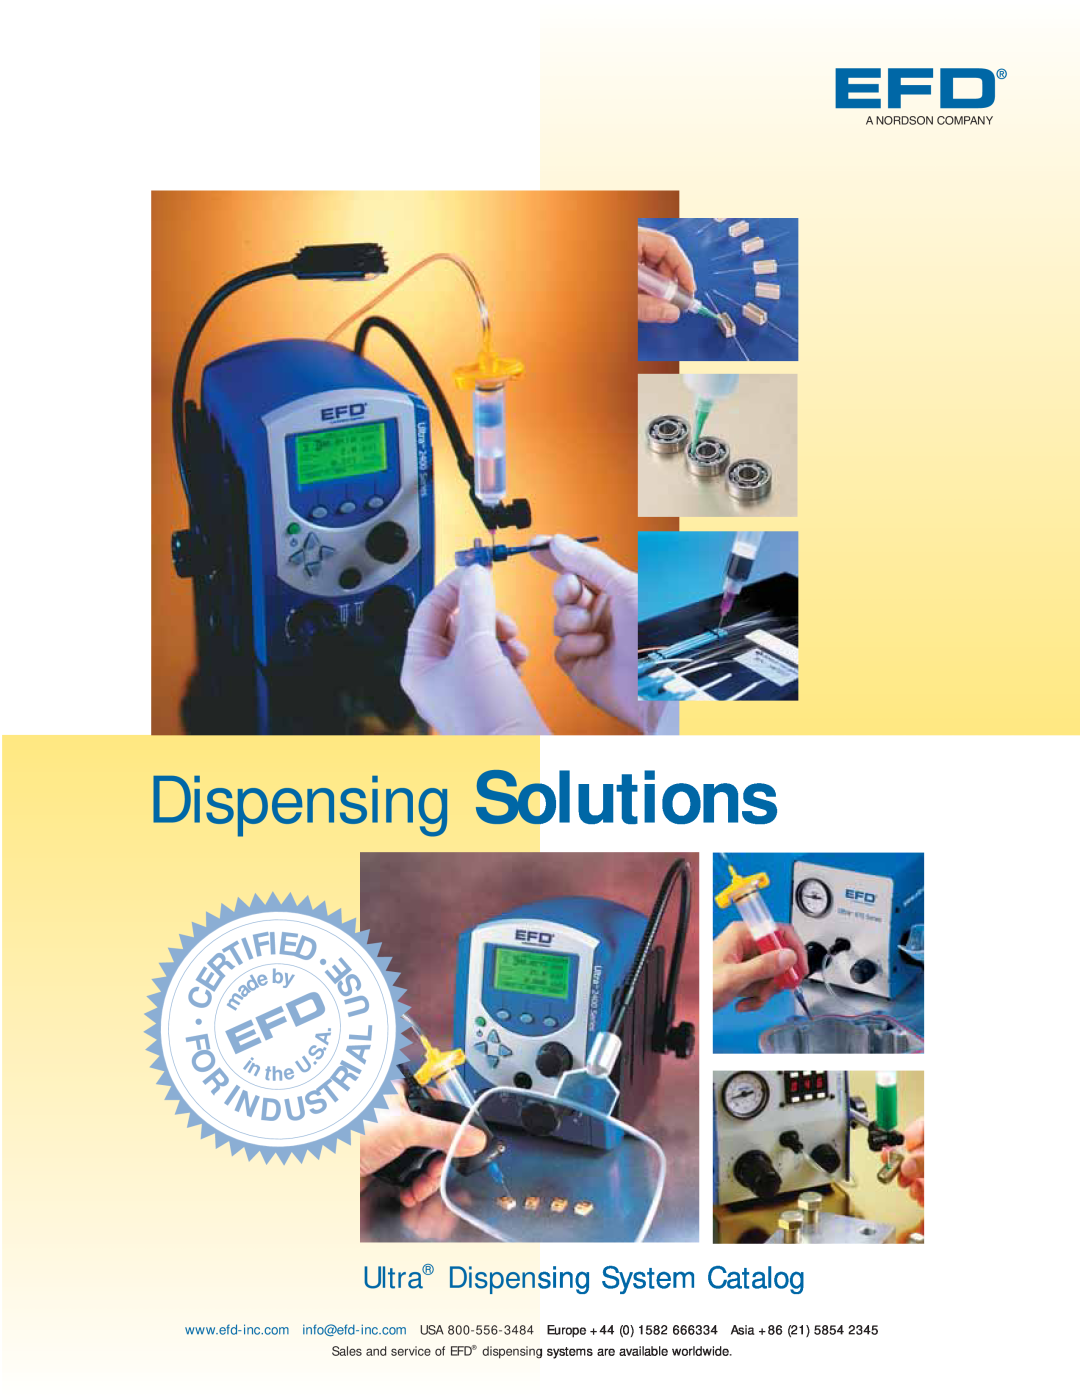 Ultra Products v051806 manual F E, Dispensing Solutions, Ultra Dispensing System Catalog, e y, A Nordson Company 